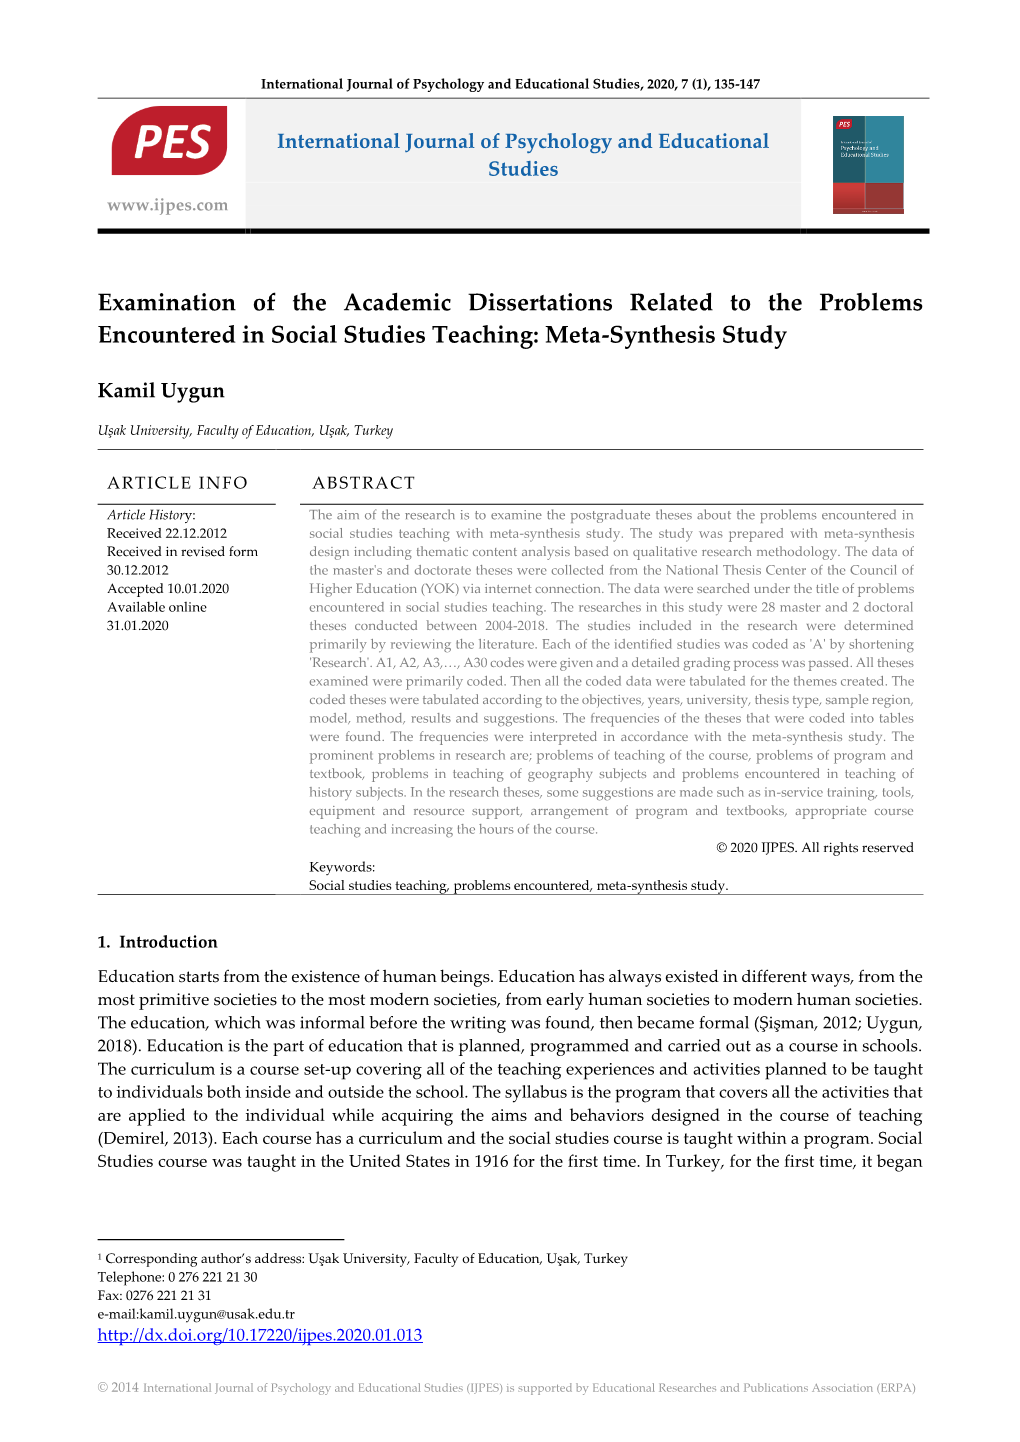 Examination of the Academic Dissertations Related to the Problems Encountered in Social Studies Teaching: Meta-Synthesis Study